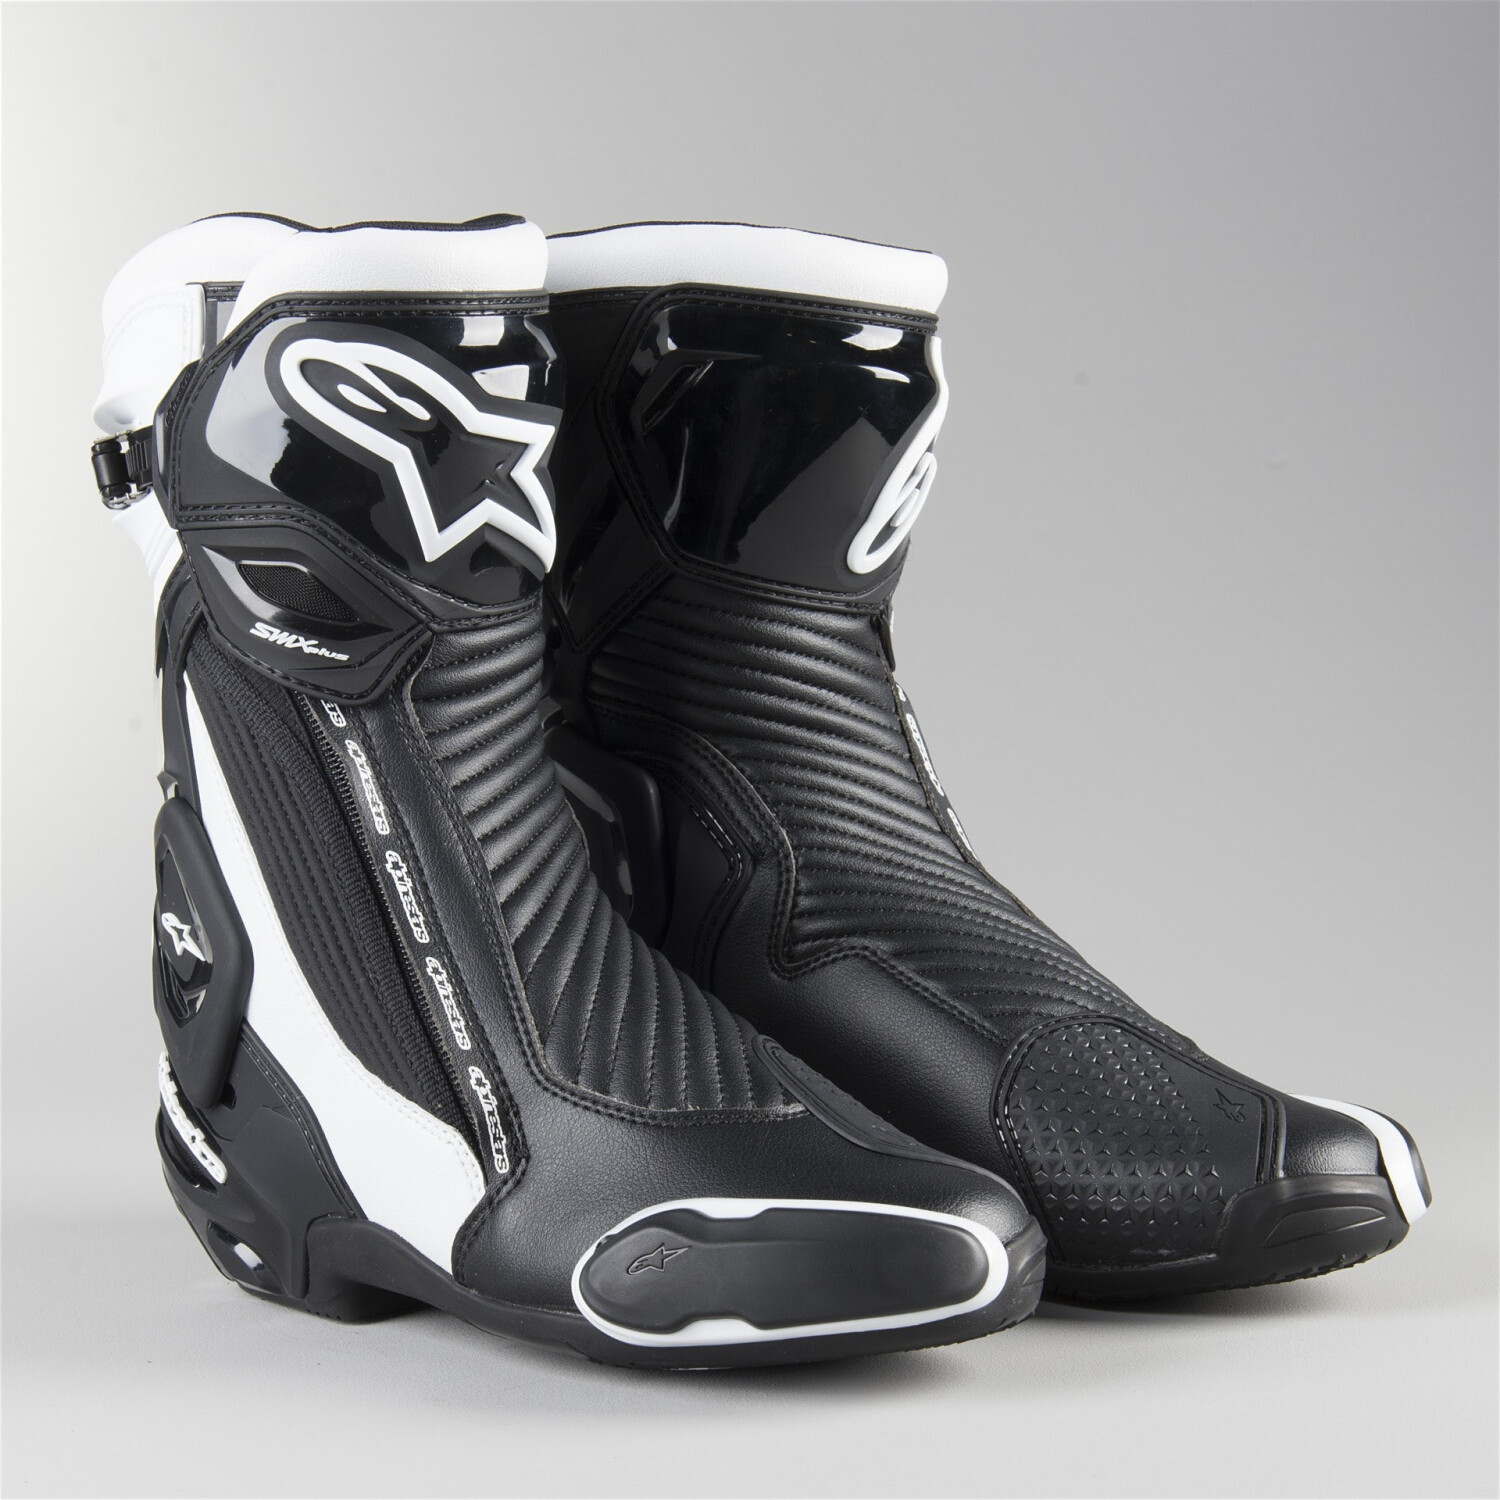 Photos - Motorcycle Boots Alpinestars SMX Plus V2 Boots Black/White 